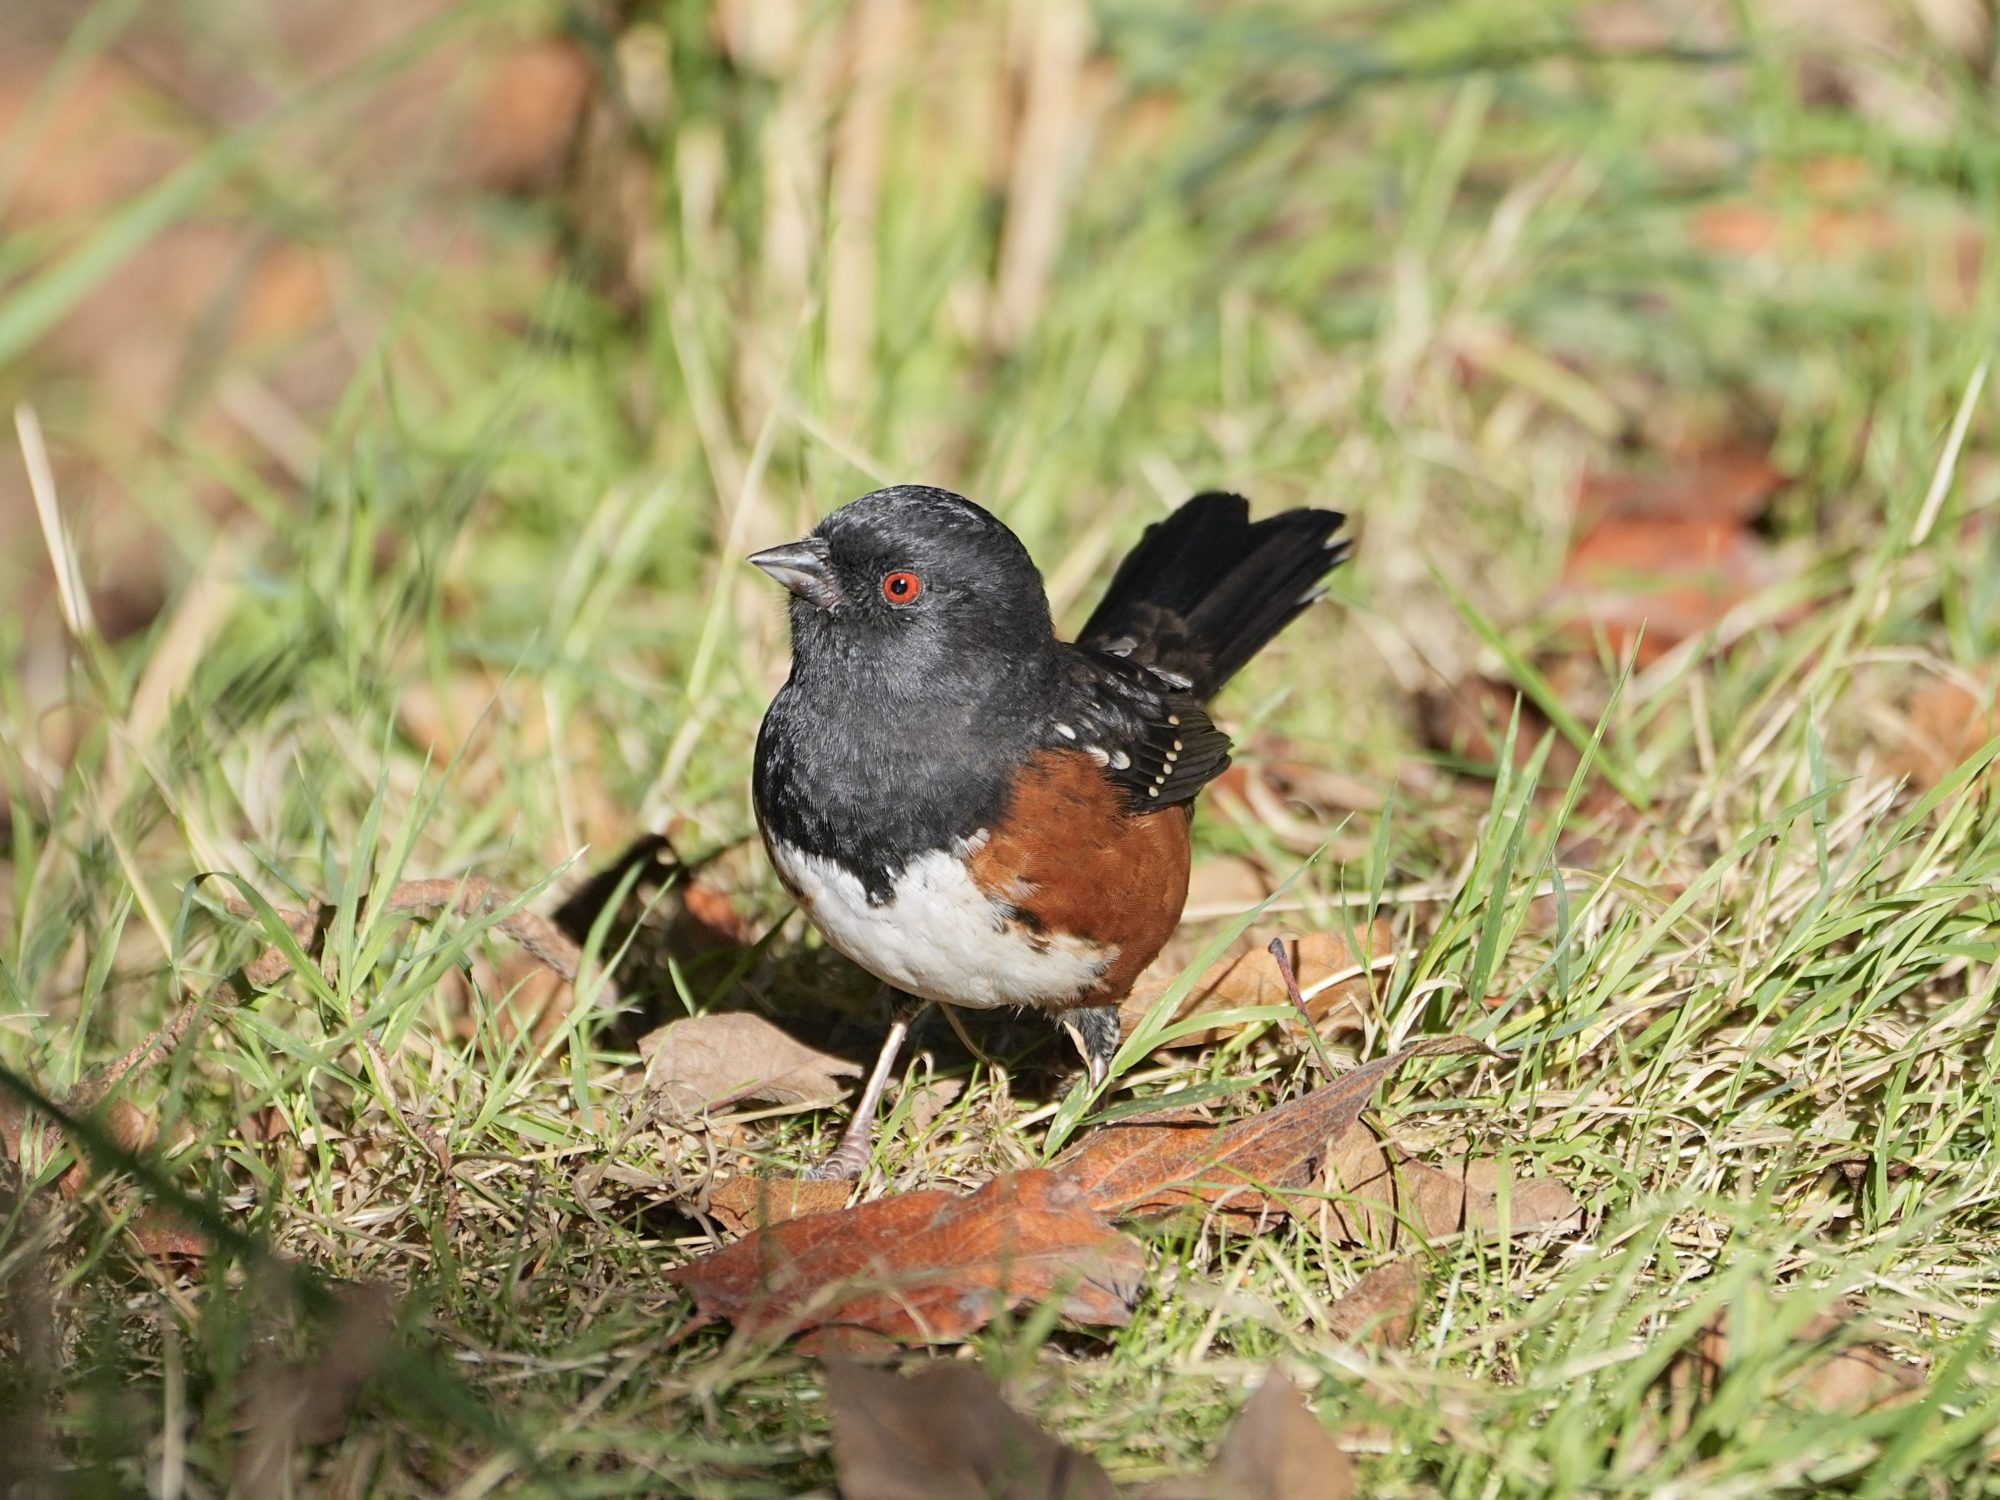 A Spotted Towhee is standing in the grass